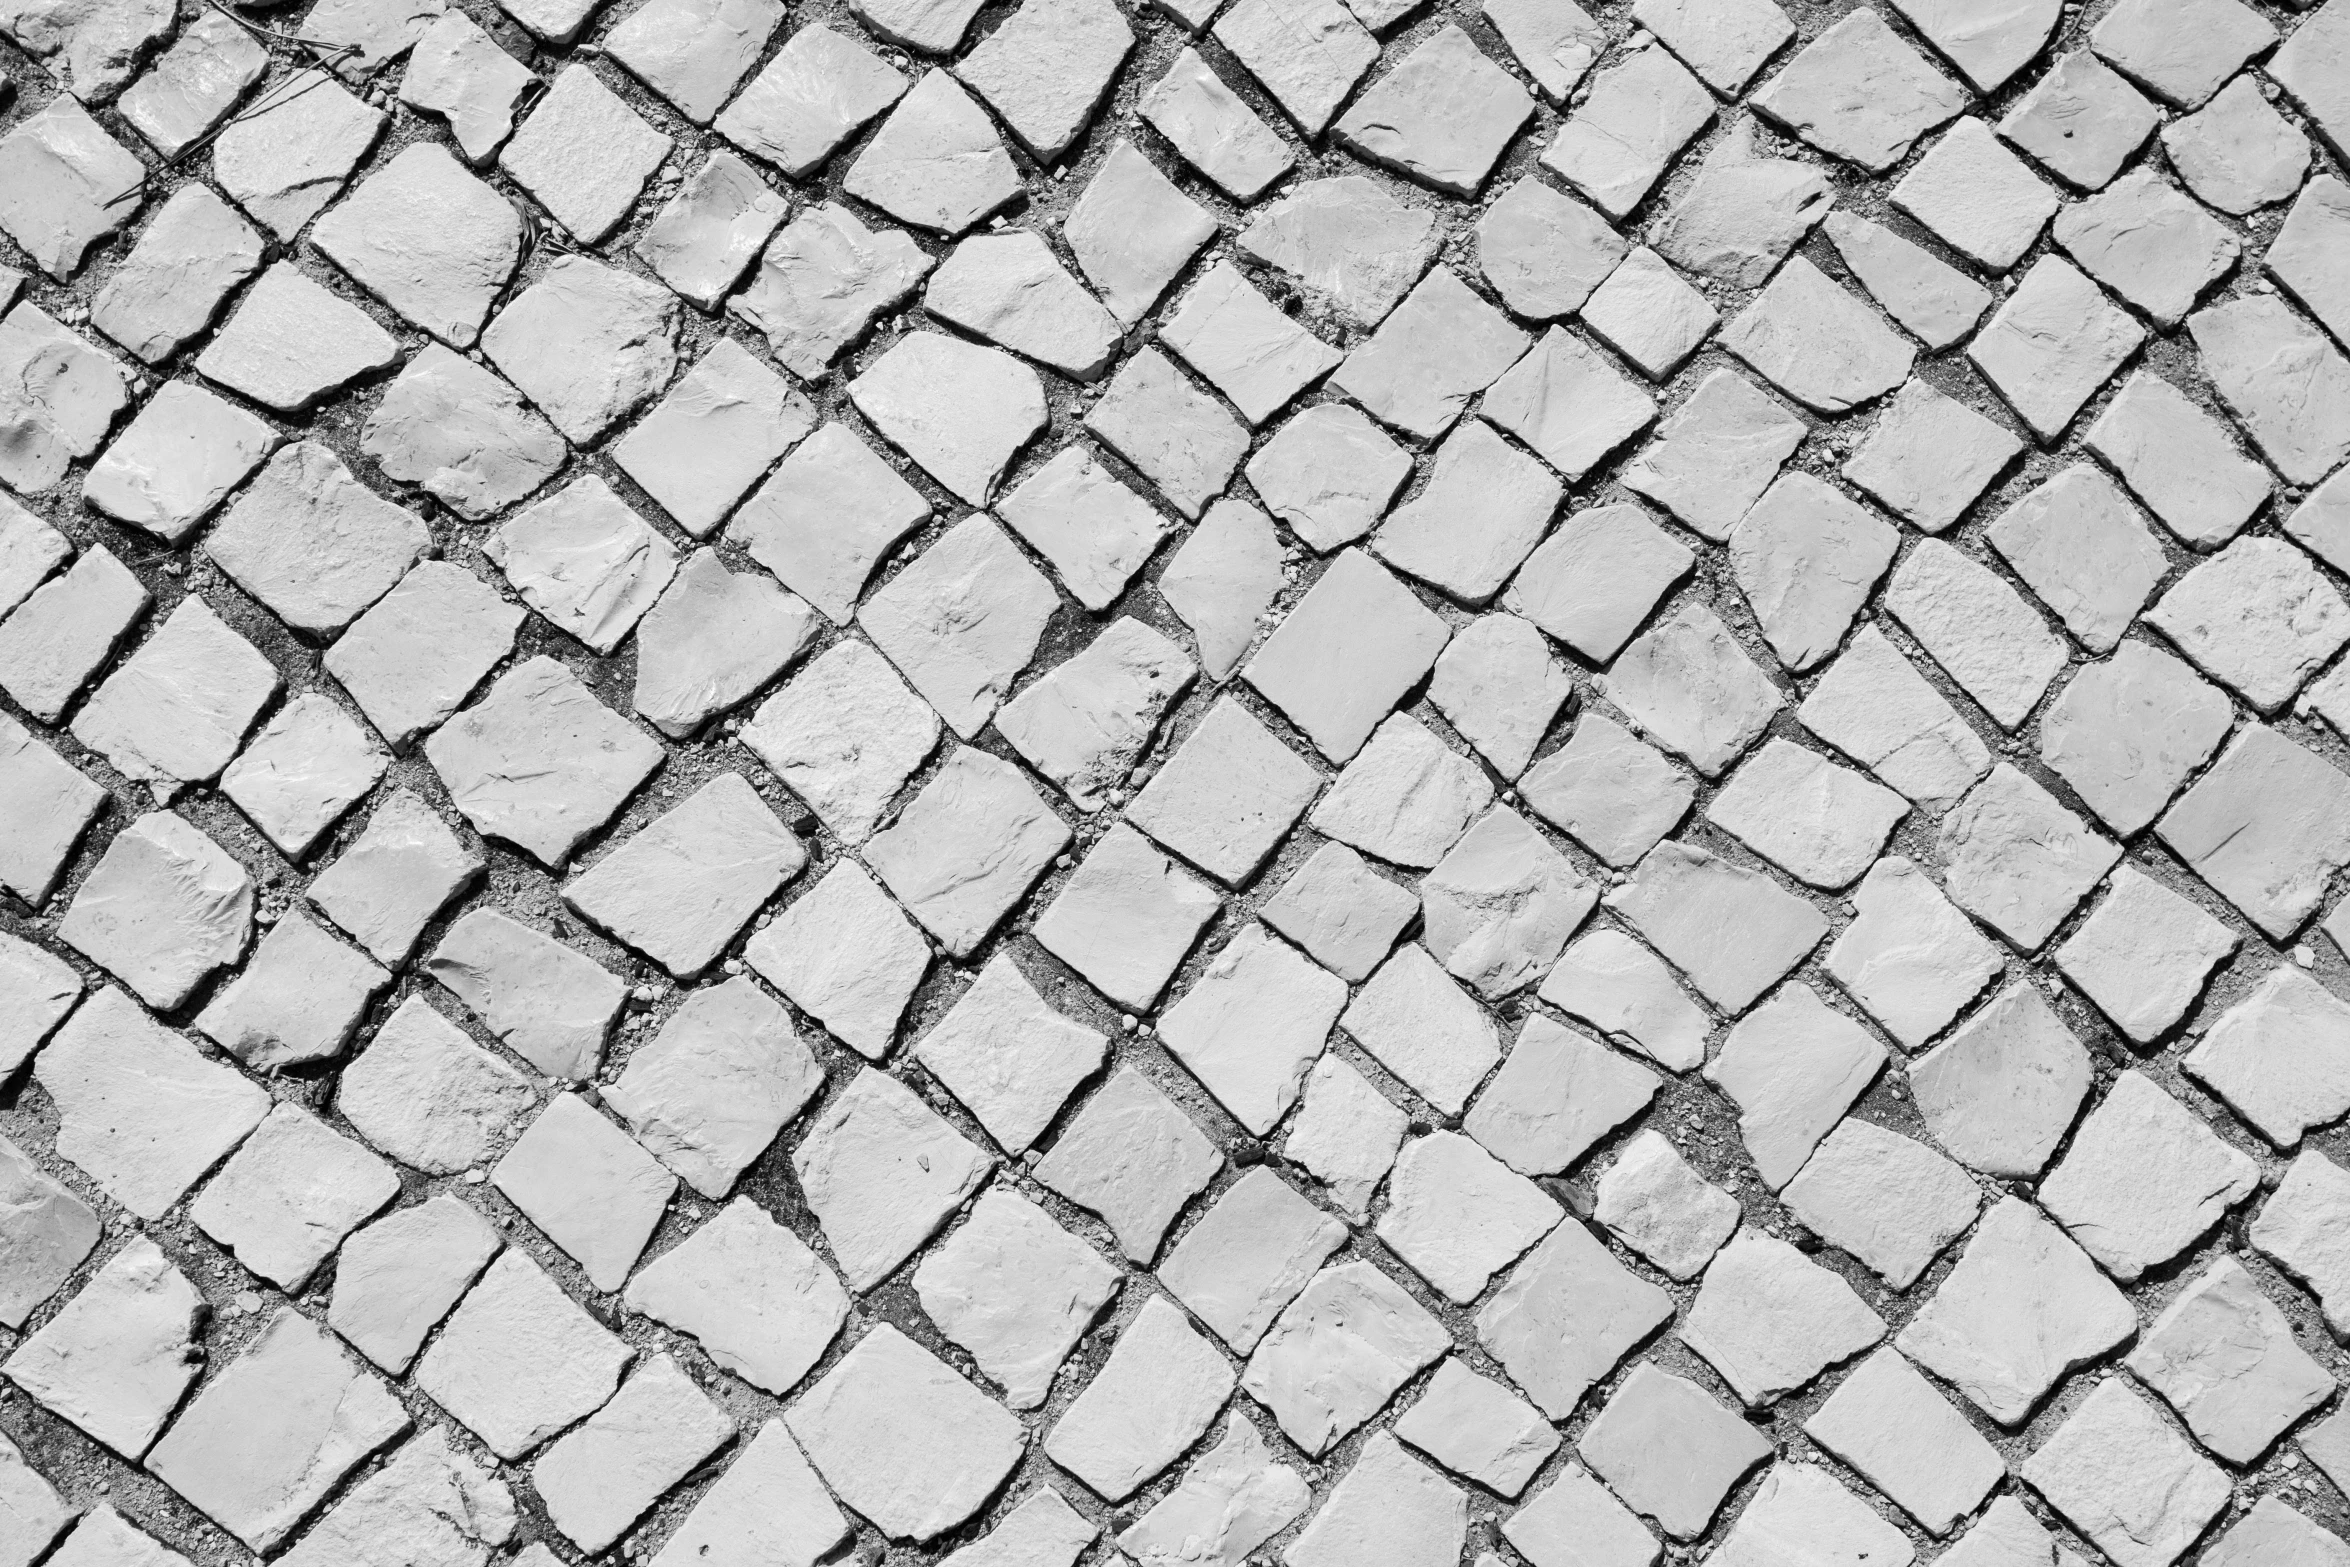 gray and white textured pattern of pavement